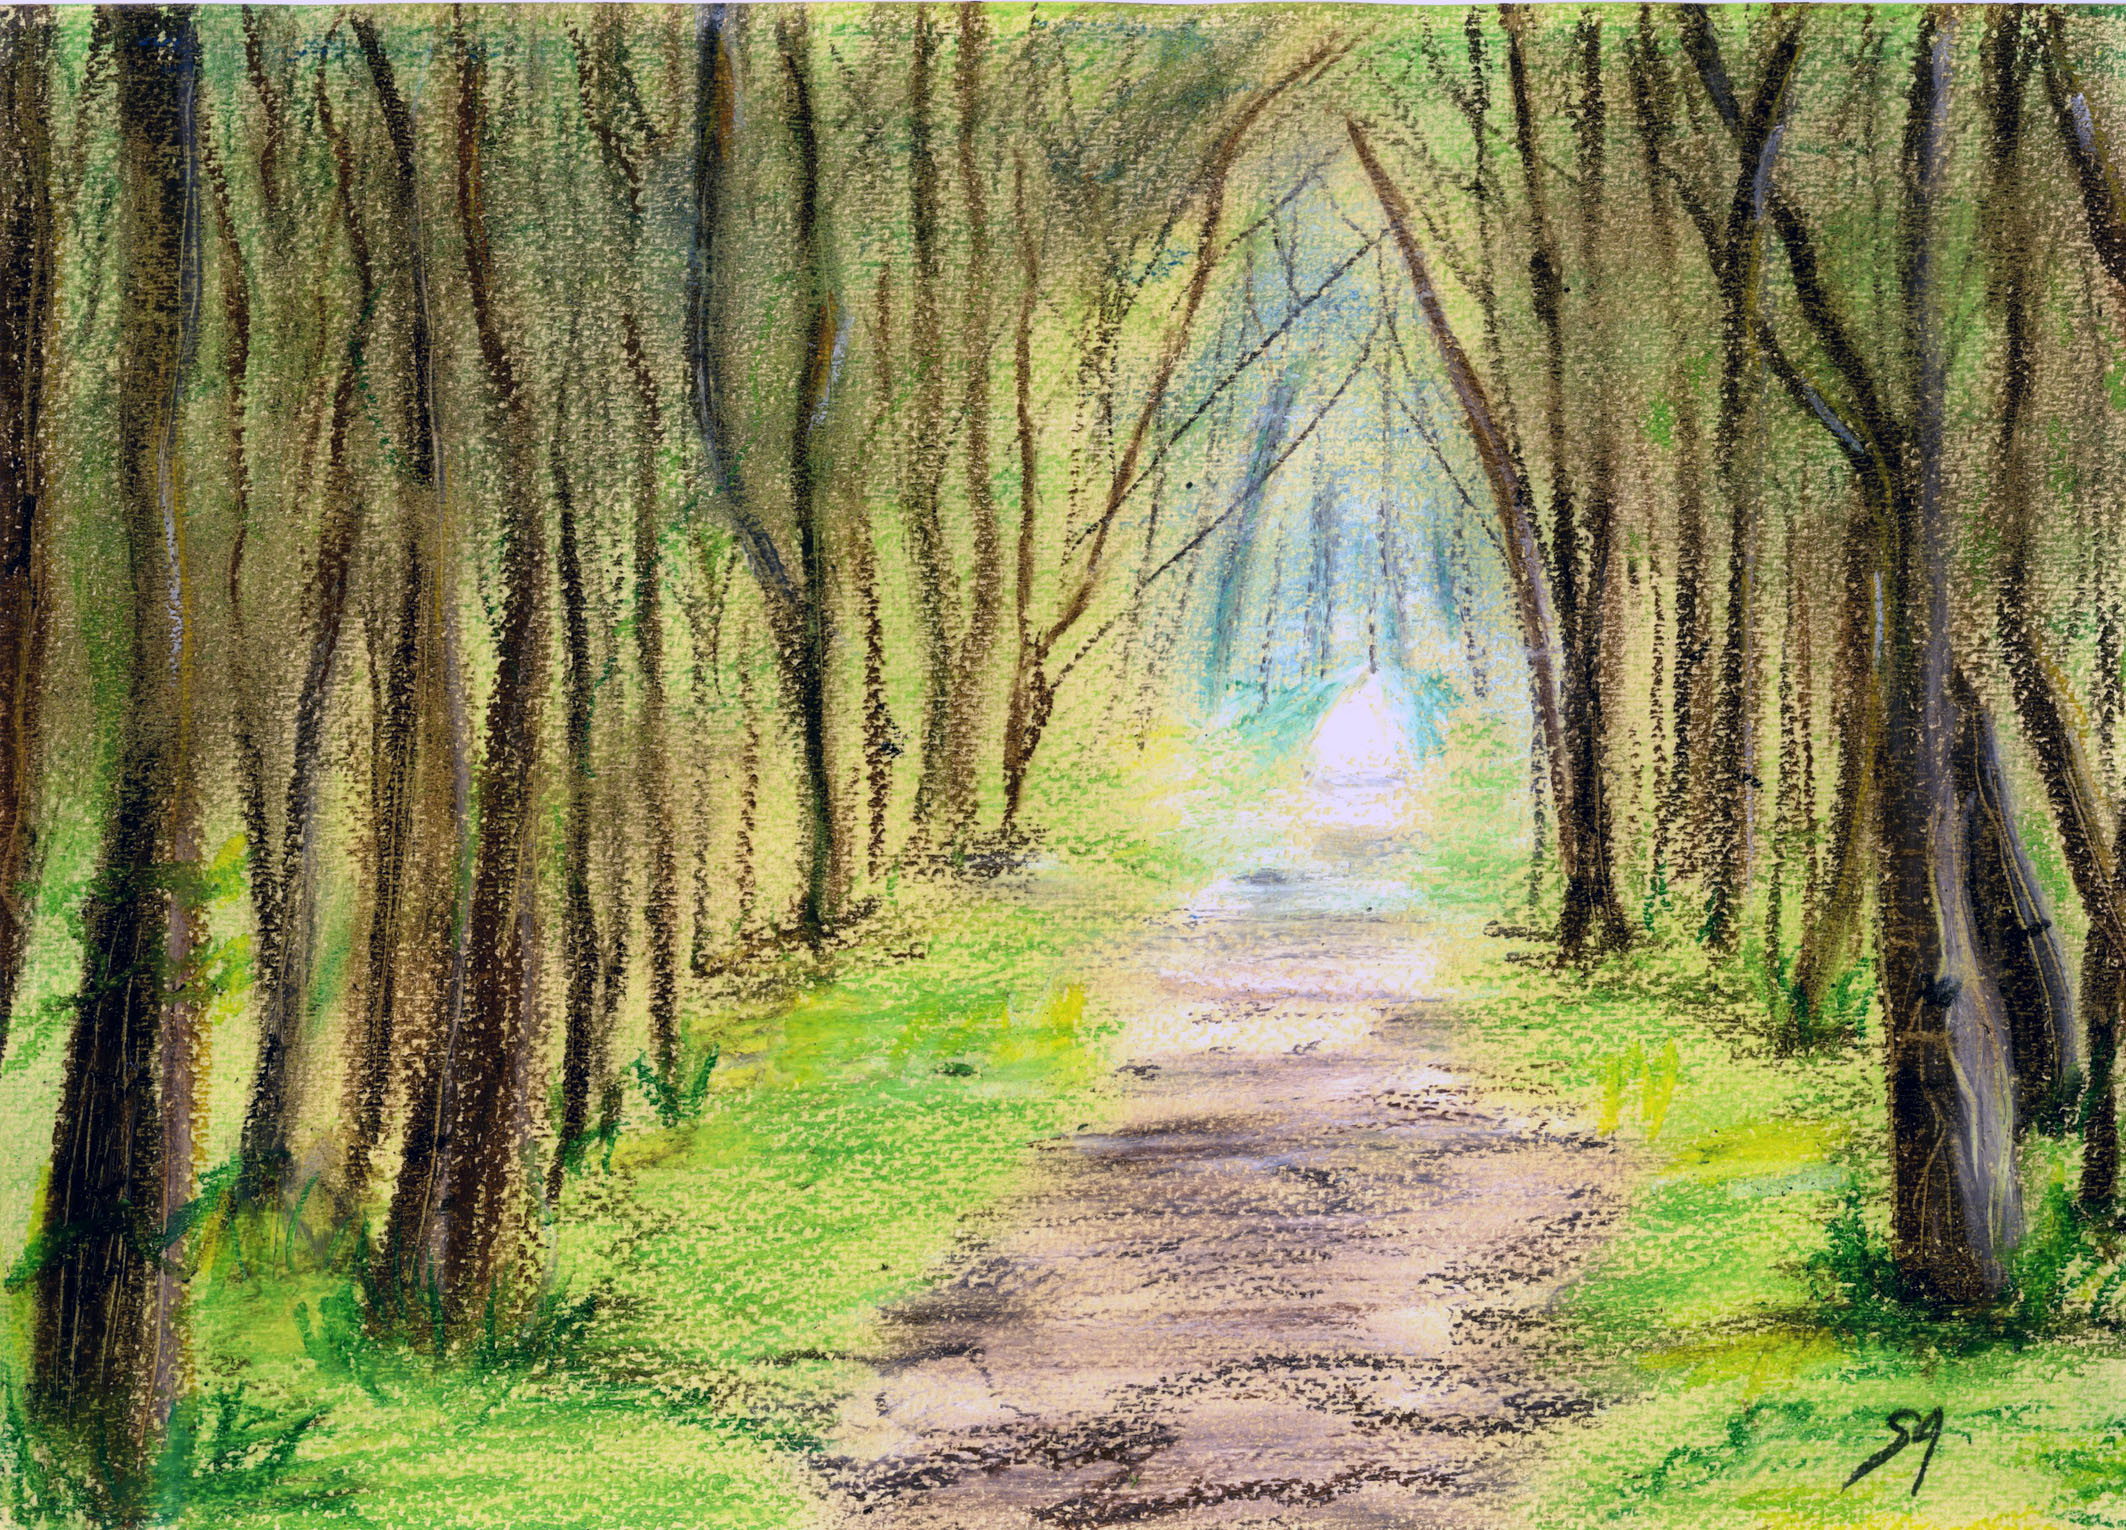 The forest path